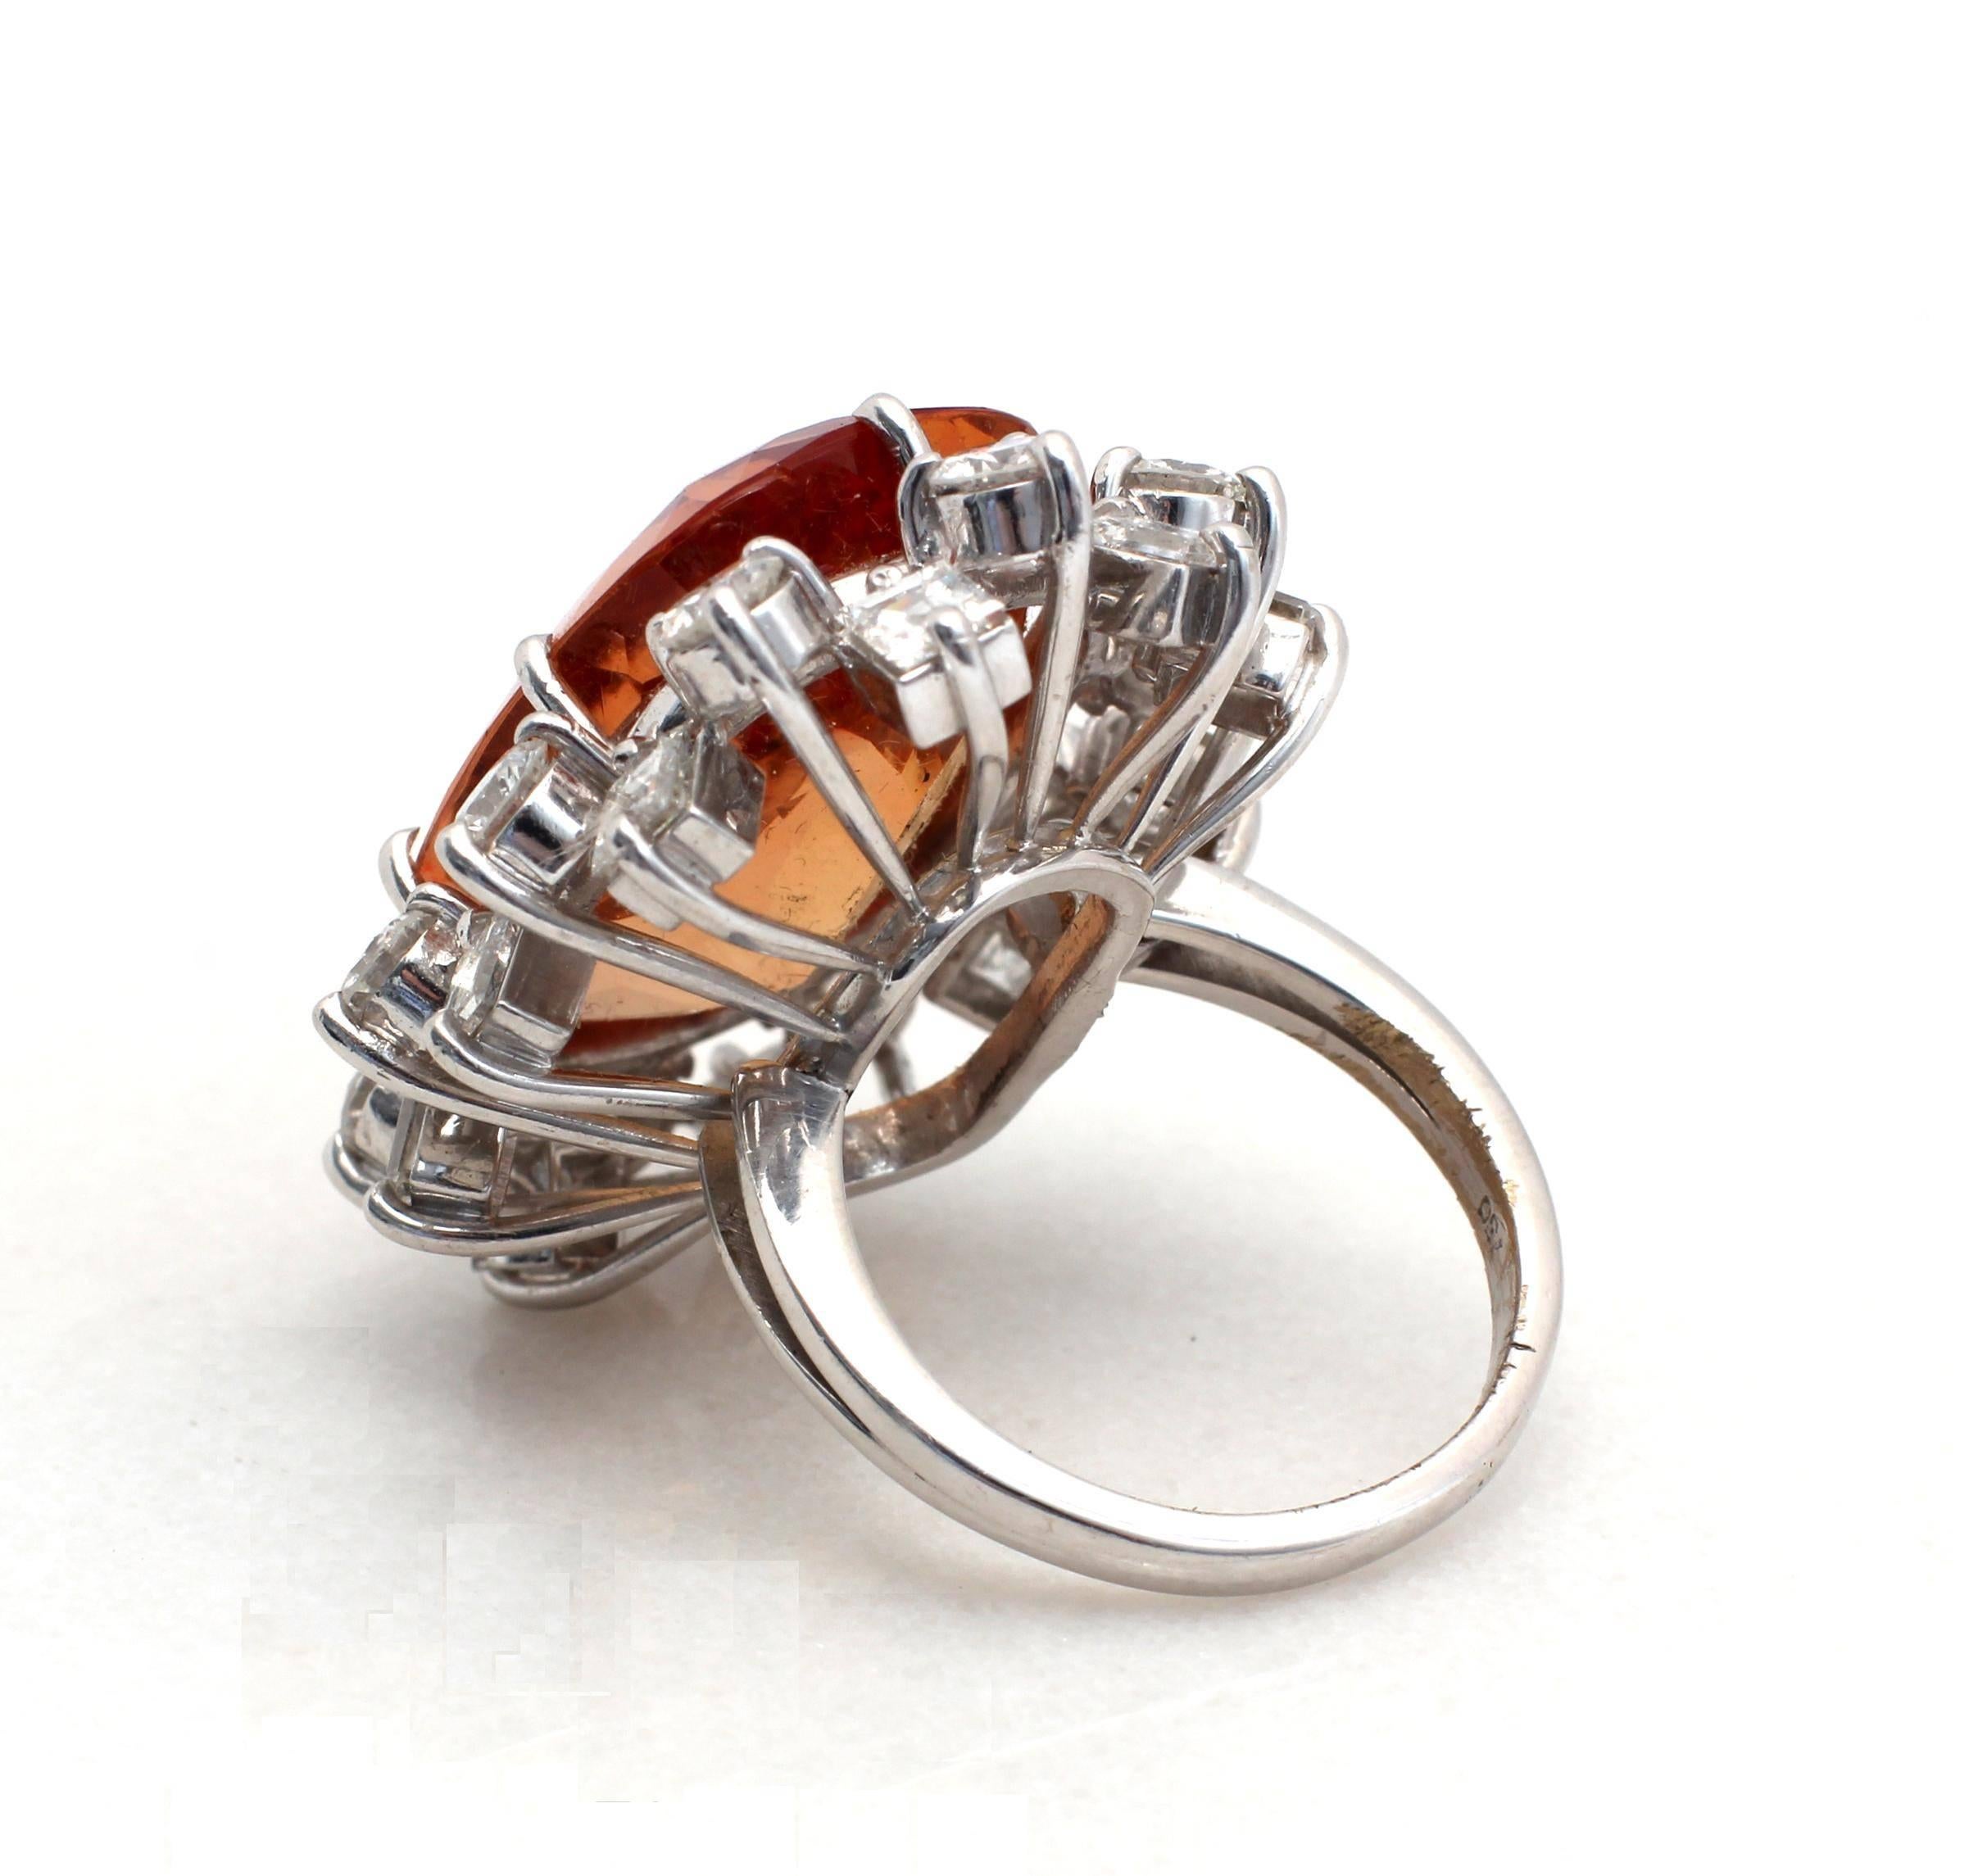 A beautiful natural orange topaz and diamond cocktail ring. The ring features a large topaz 17.20 ct approximately, surrounded by two halos of diamonds totally approximately 3.30 ct ,F-G color, VVS-VS clarity. Weight: 16.3 gr. Ring size: US 5 1/2.